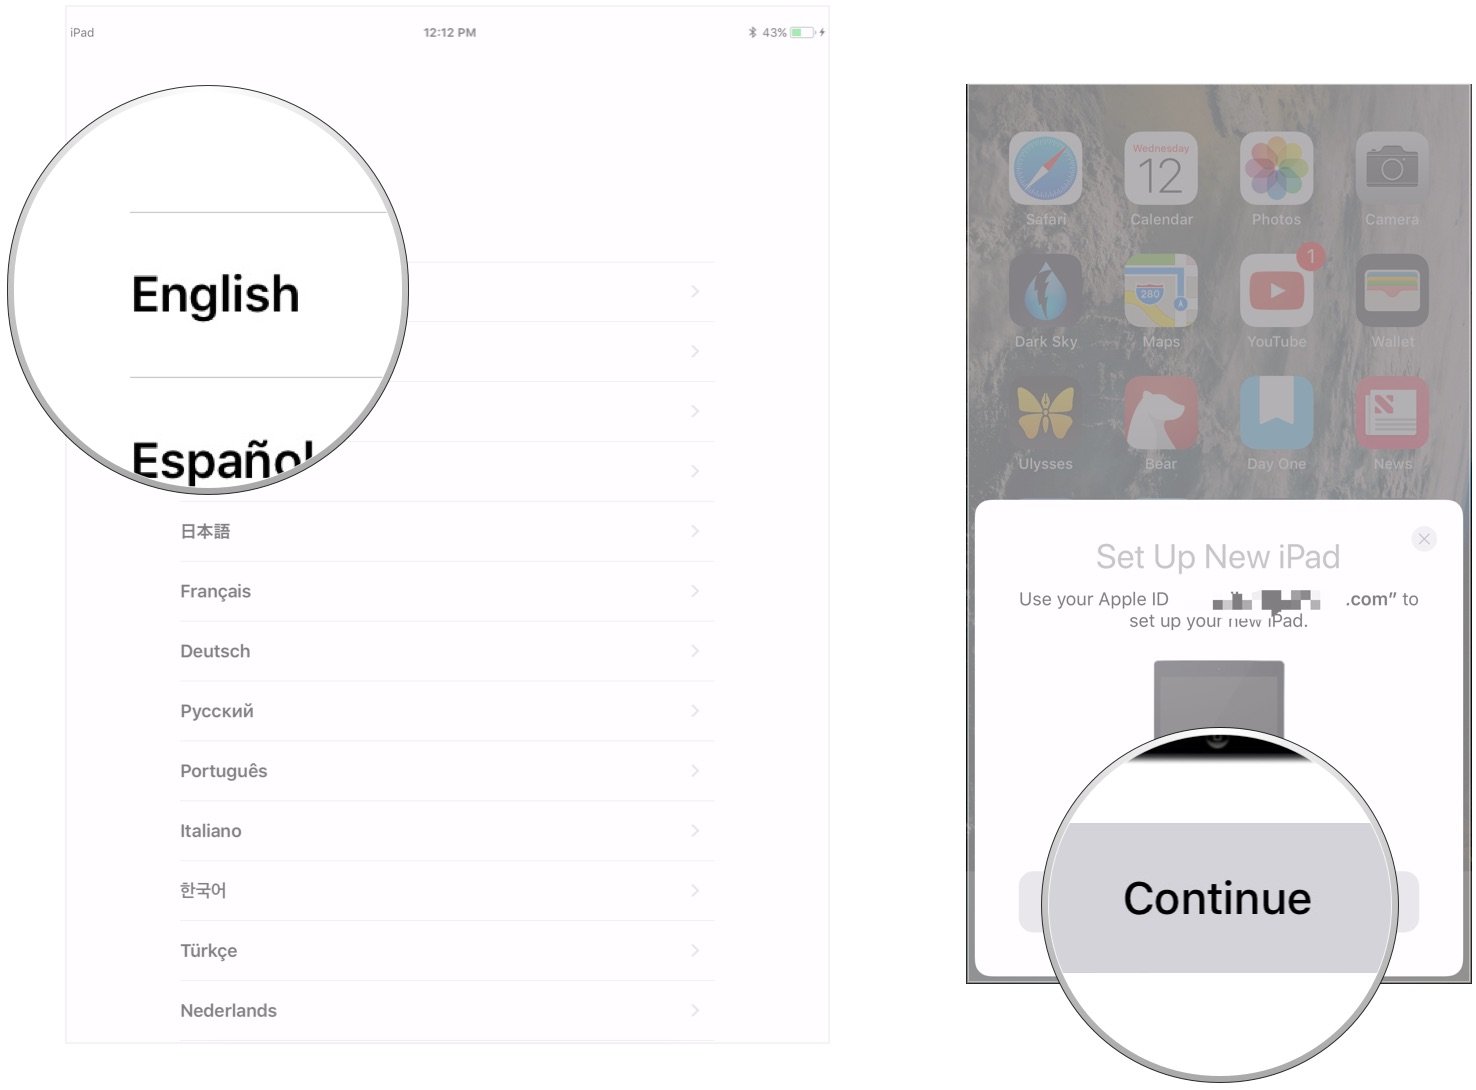 The new iPhone setup steps showing Choose language and Tap Continue